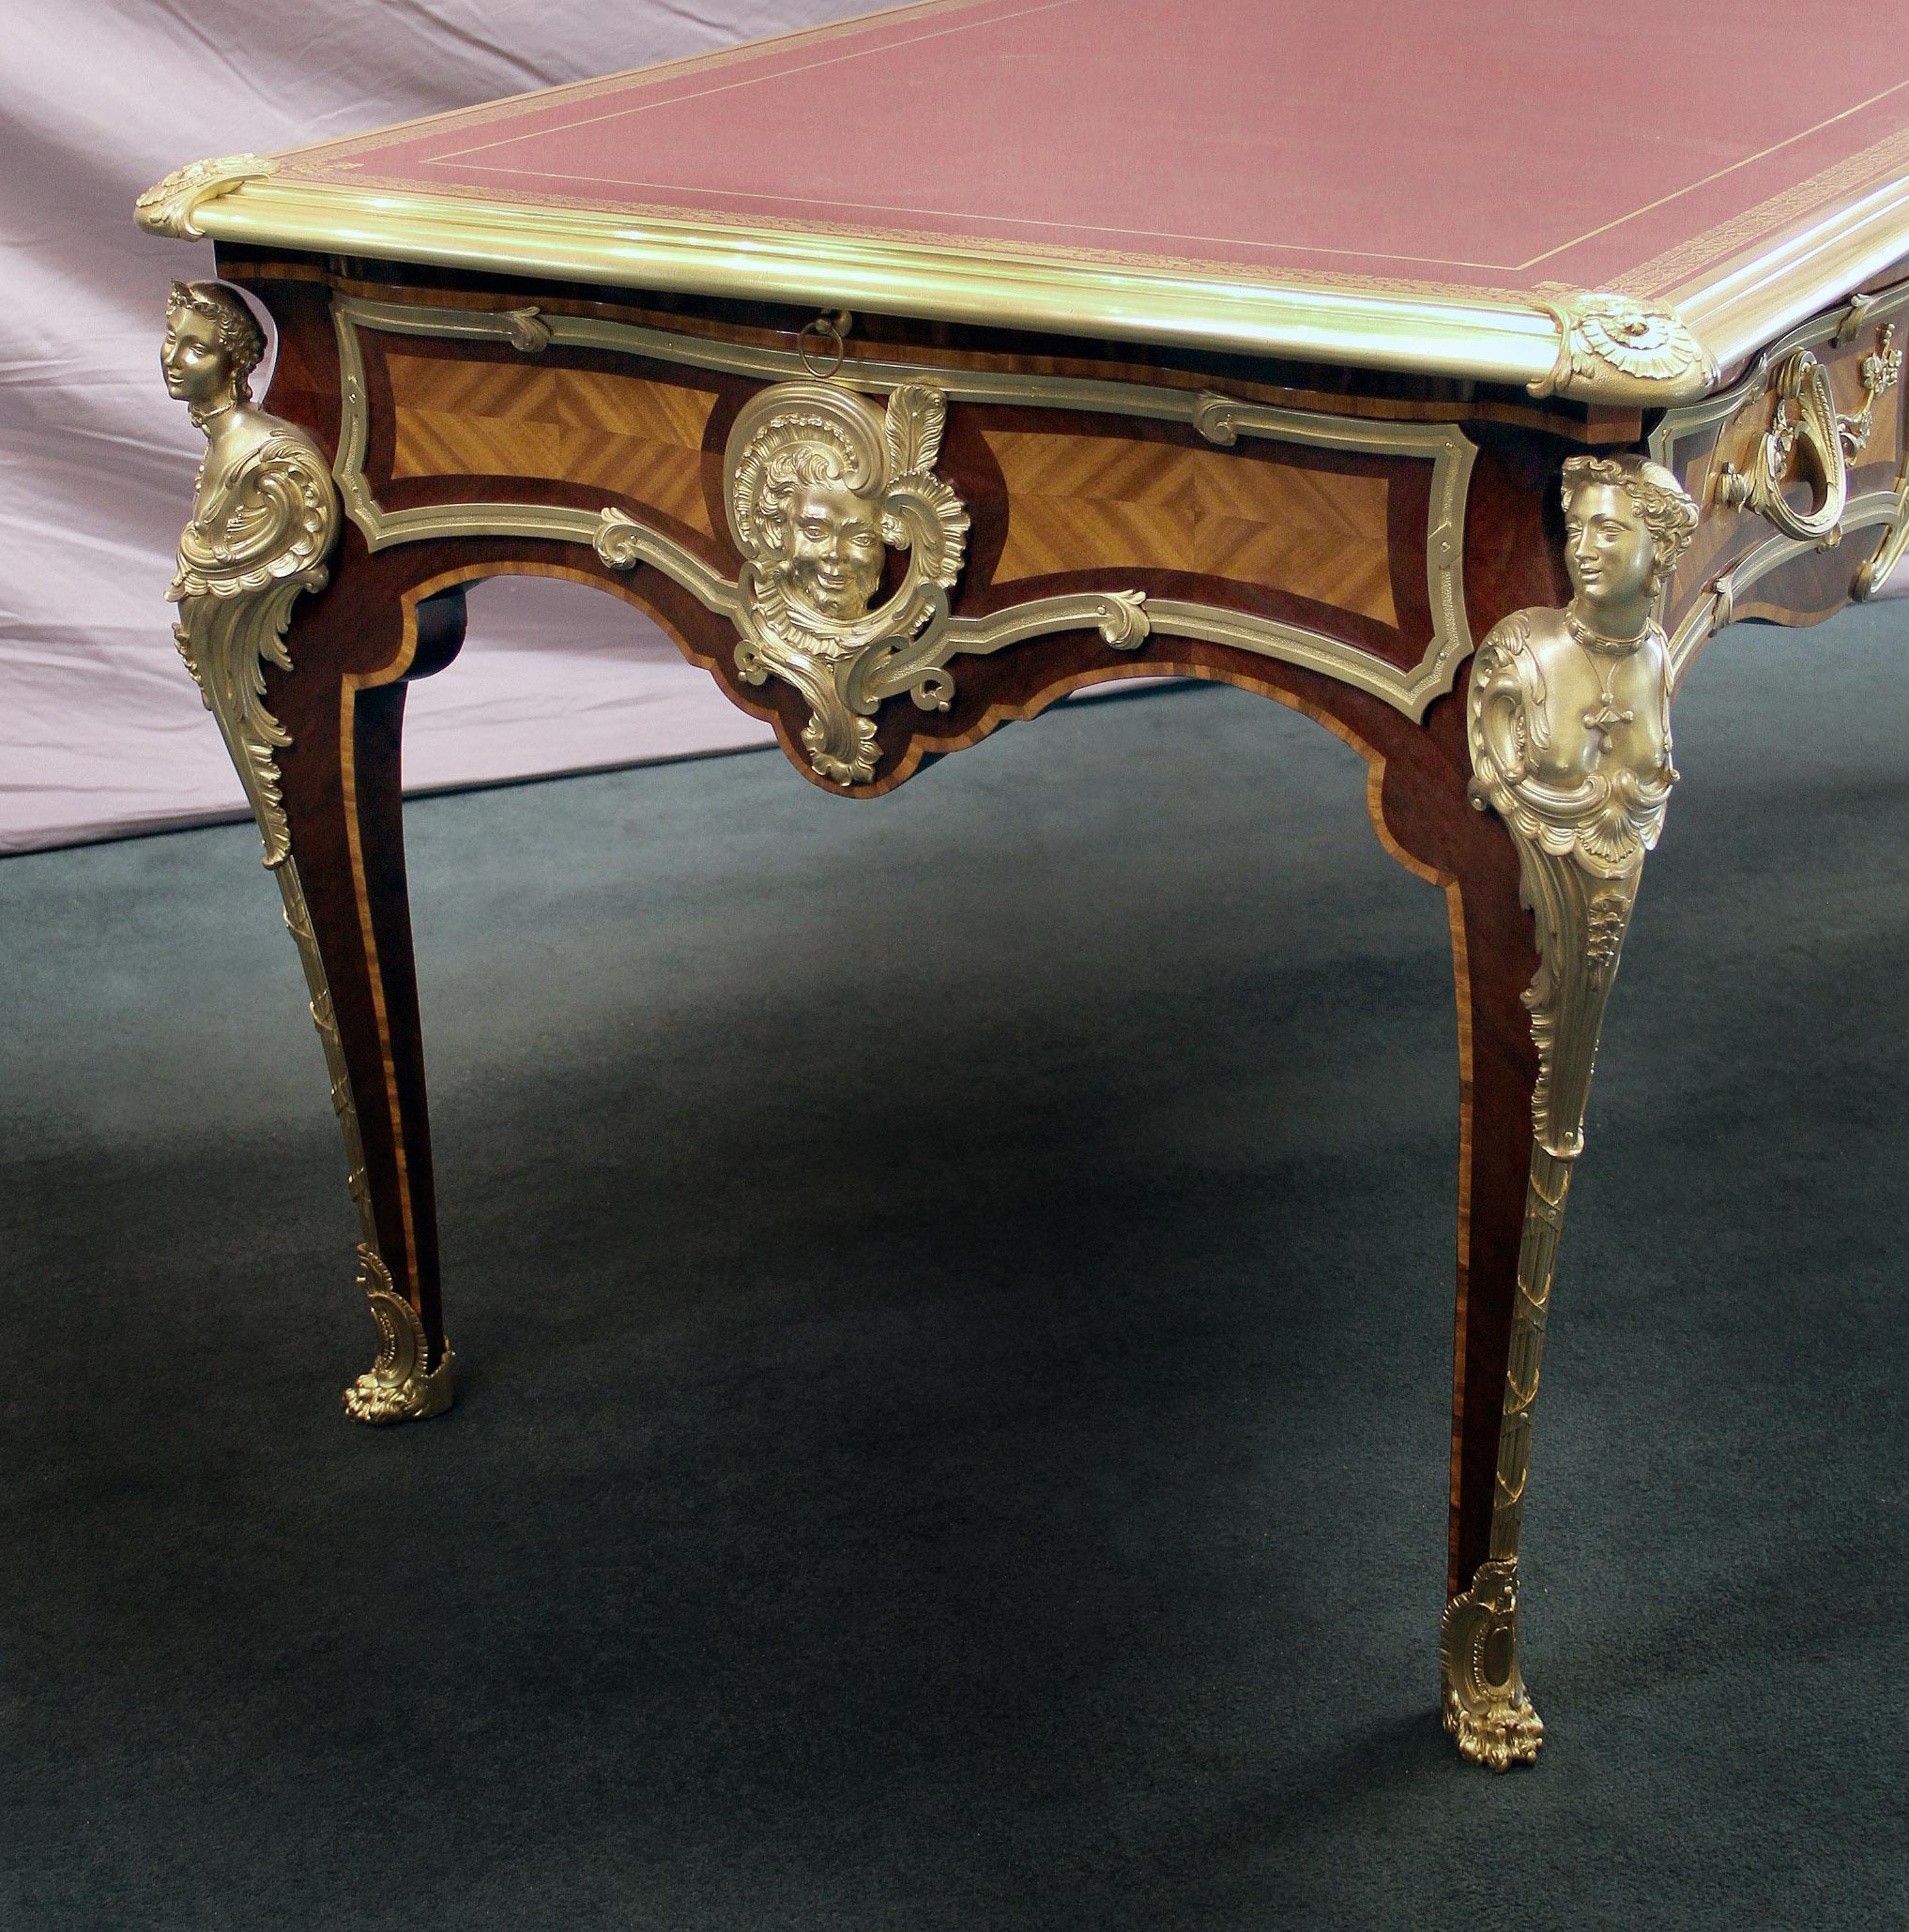 French Late 19th Century Gilt Bronze Mounted Parquetry Bureau Plat After Cressent For Sale